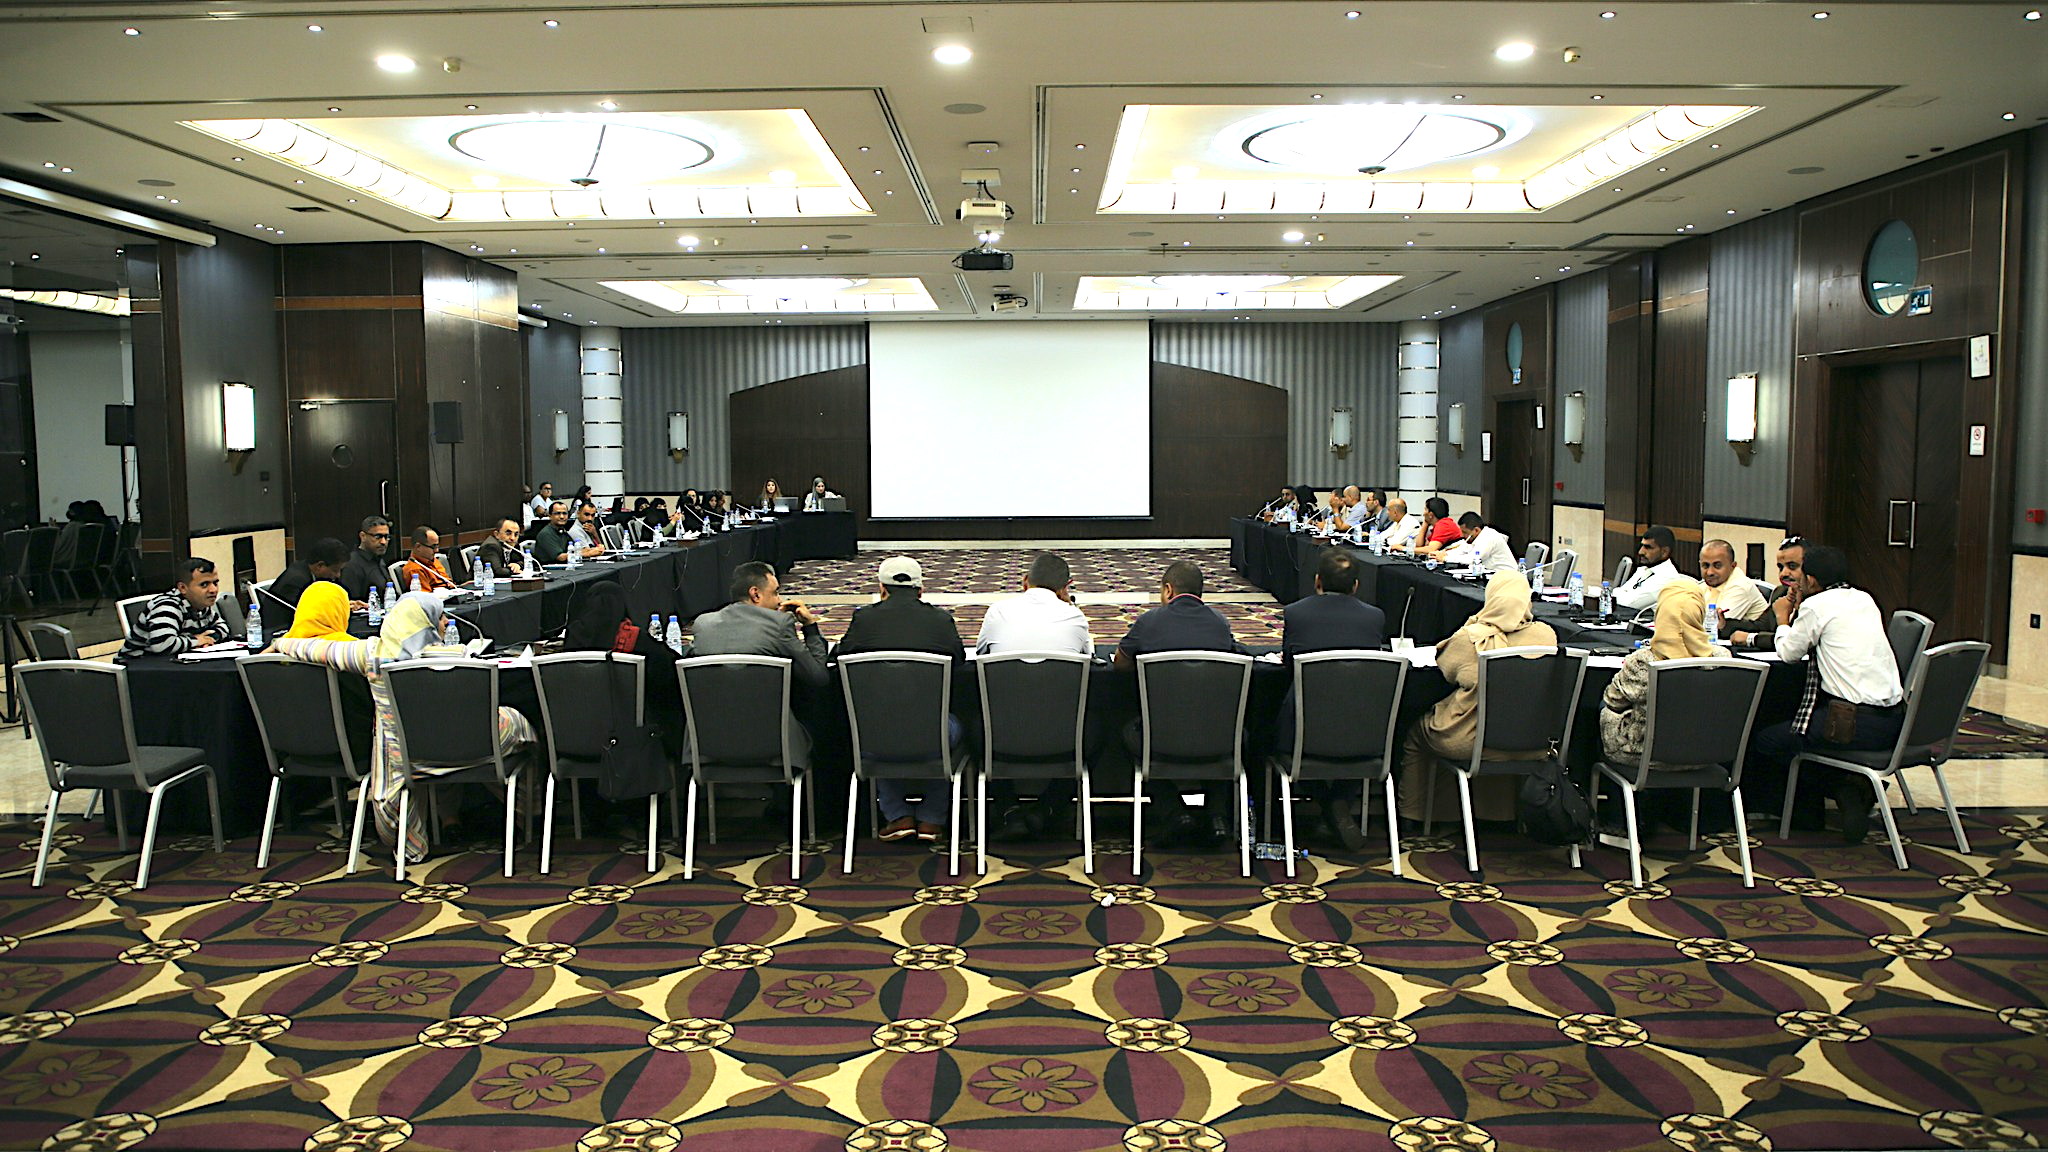 Participants in the workshop sit at a conference table with backs facing camera.